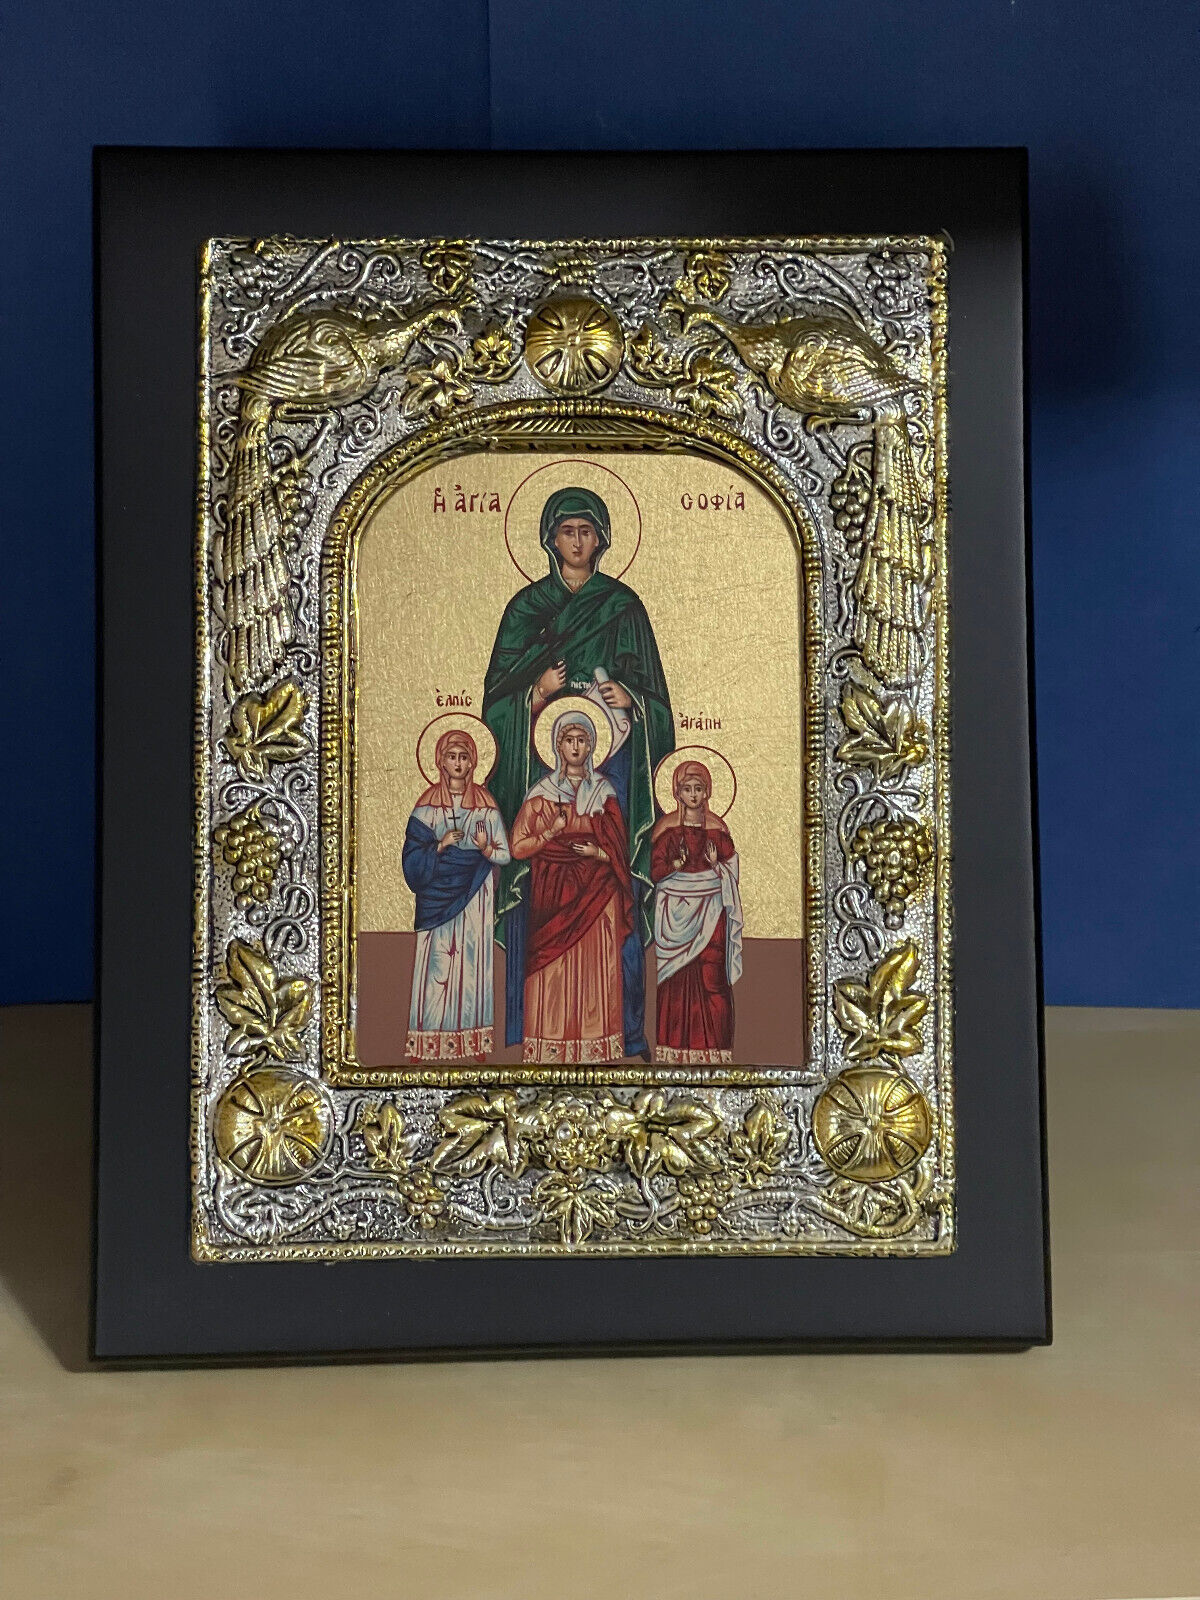 Saint Sophia and her Daughters-SILK SCREENS ICONS SILVER PLATED 950 -6.7 x 8.7in